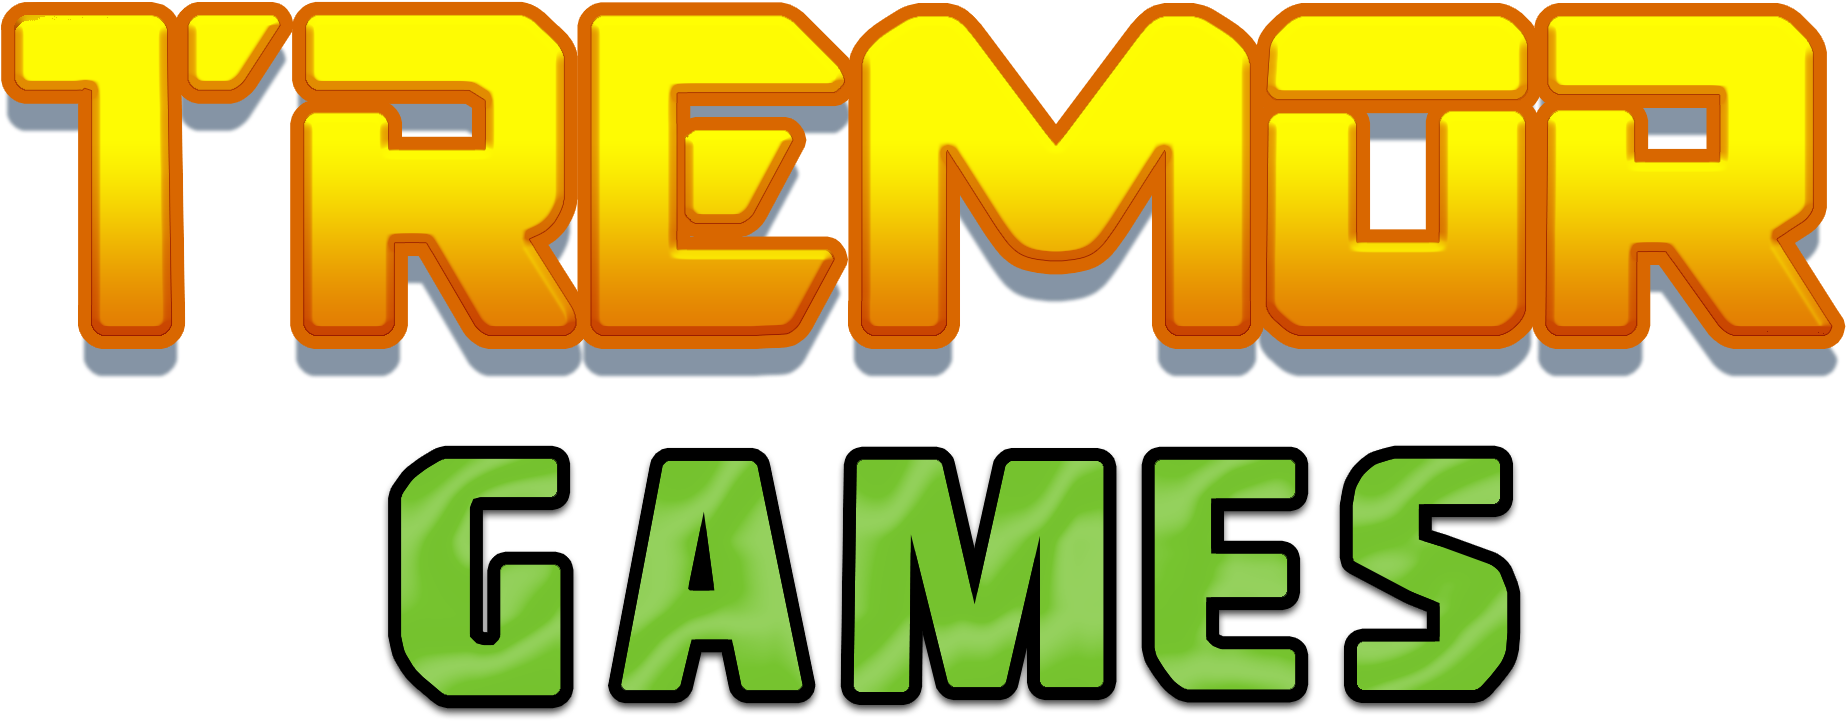 Heading - Tremor Games Logo Clipart (1920x1080), Png Download